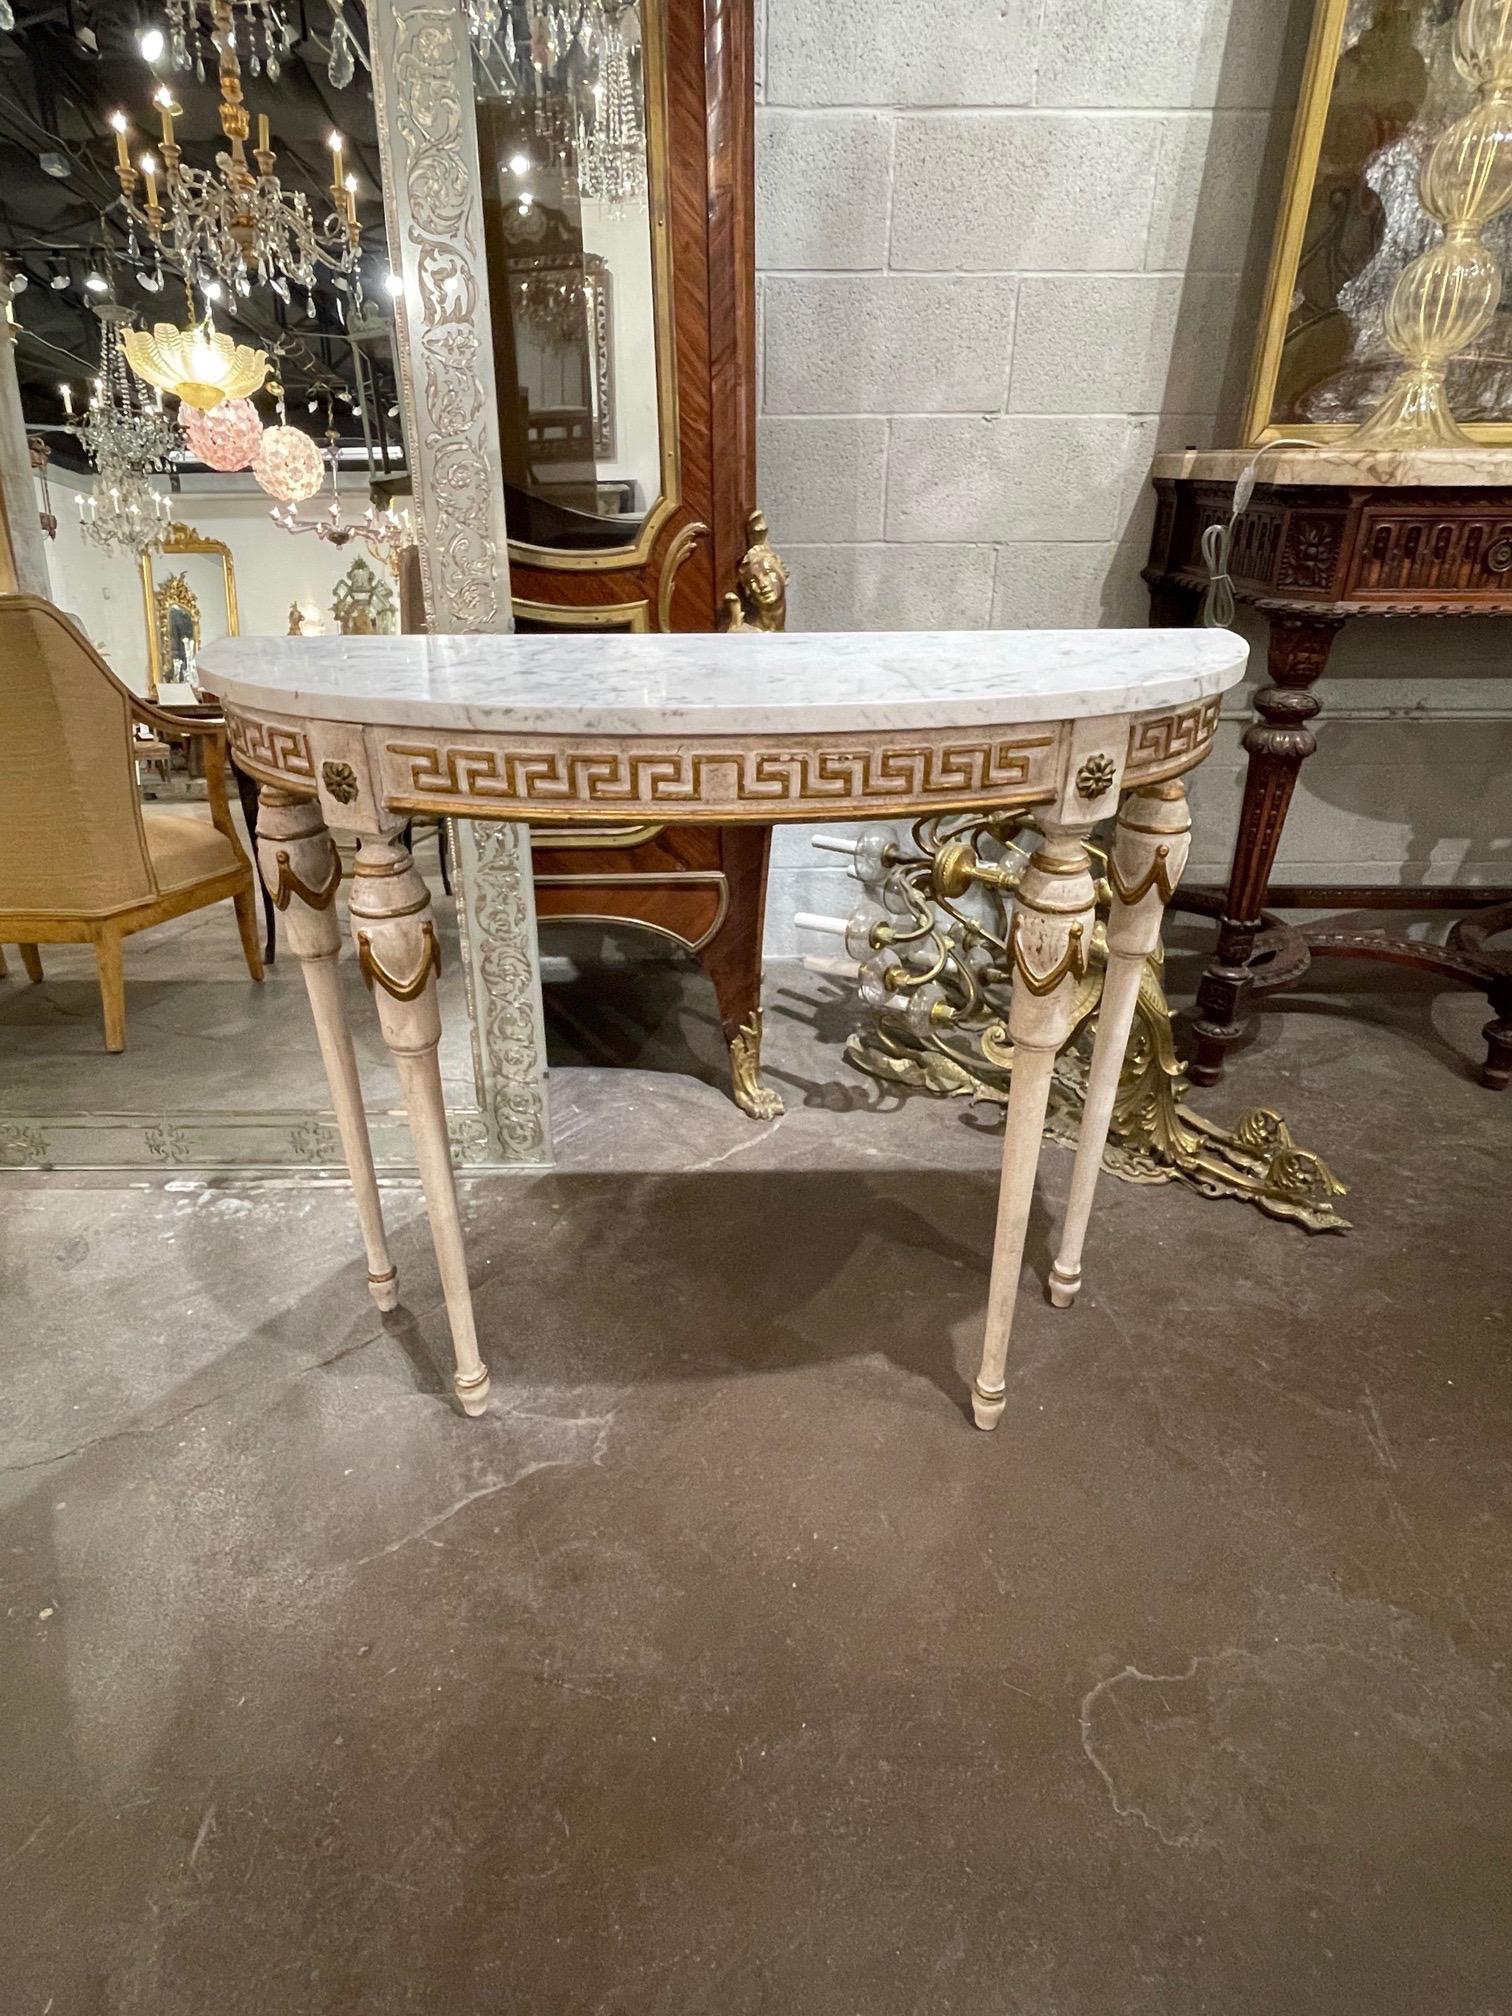 Beautiful vintage Italian carved and painted demi-lune table with Greek Key pattern and a carrara marble top. Fine quality and great for a smaller space. A very pretty classic!